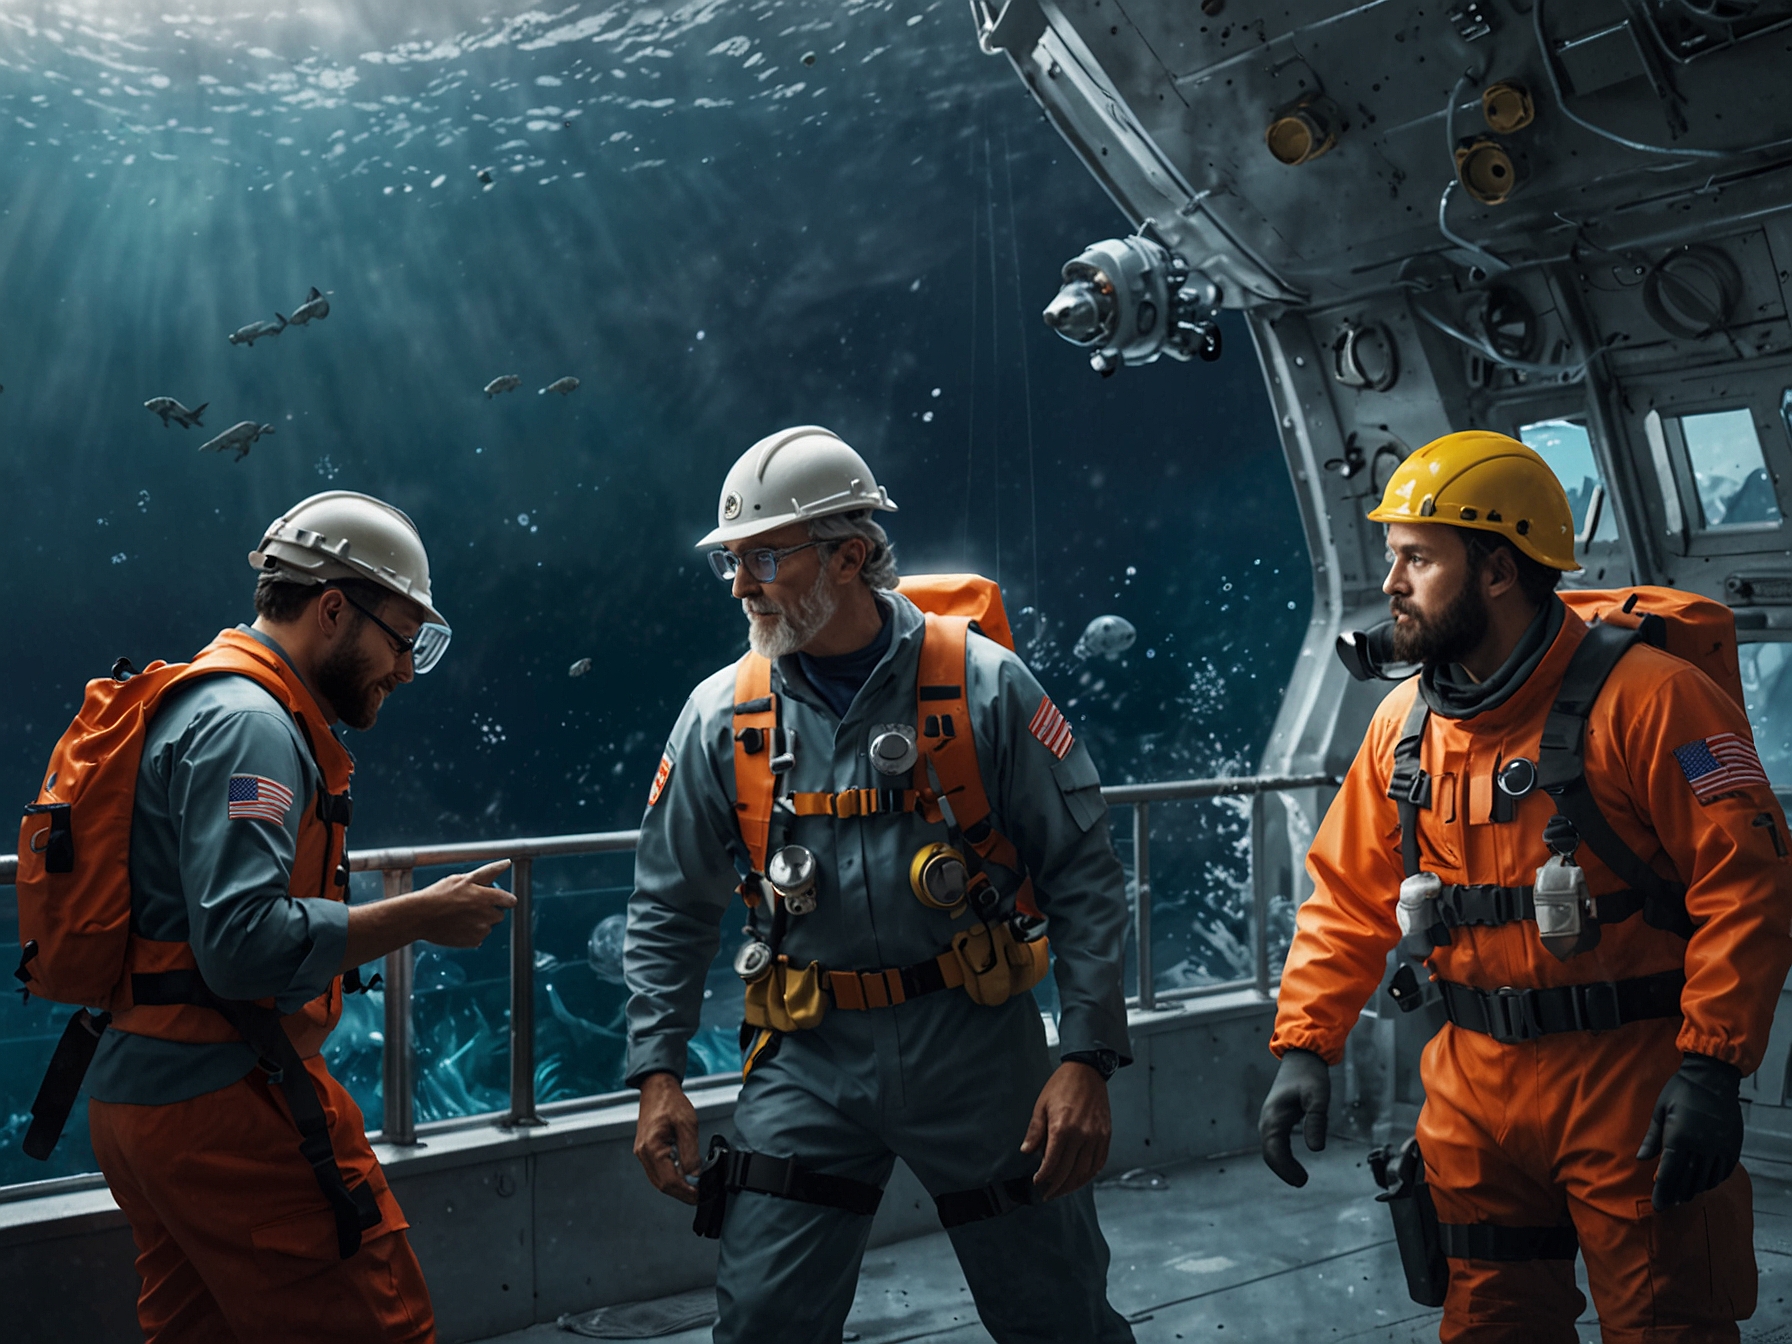 Depiction of a diverse team of ocean explorers and engineers collaborating on safety protocols and training, showcasing the community's commitment to transparent and cooperative advancements.